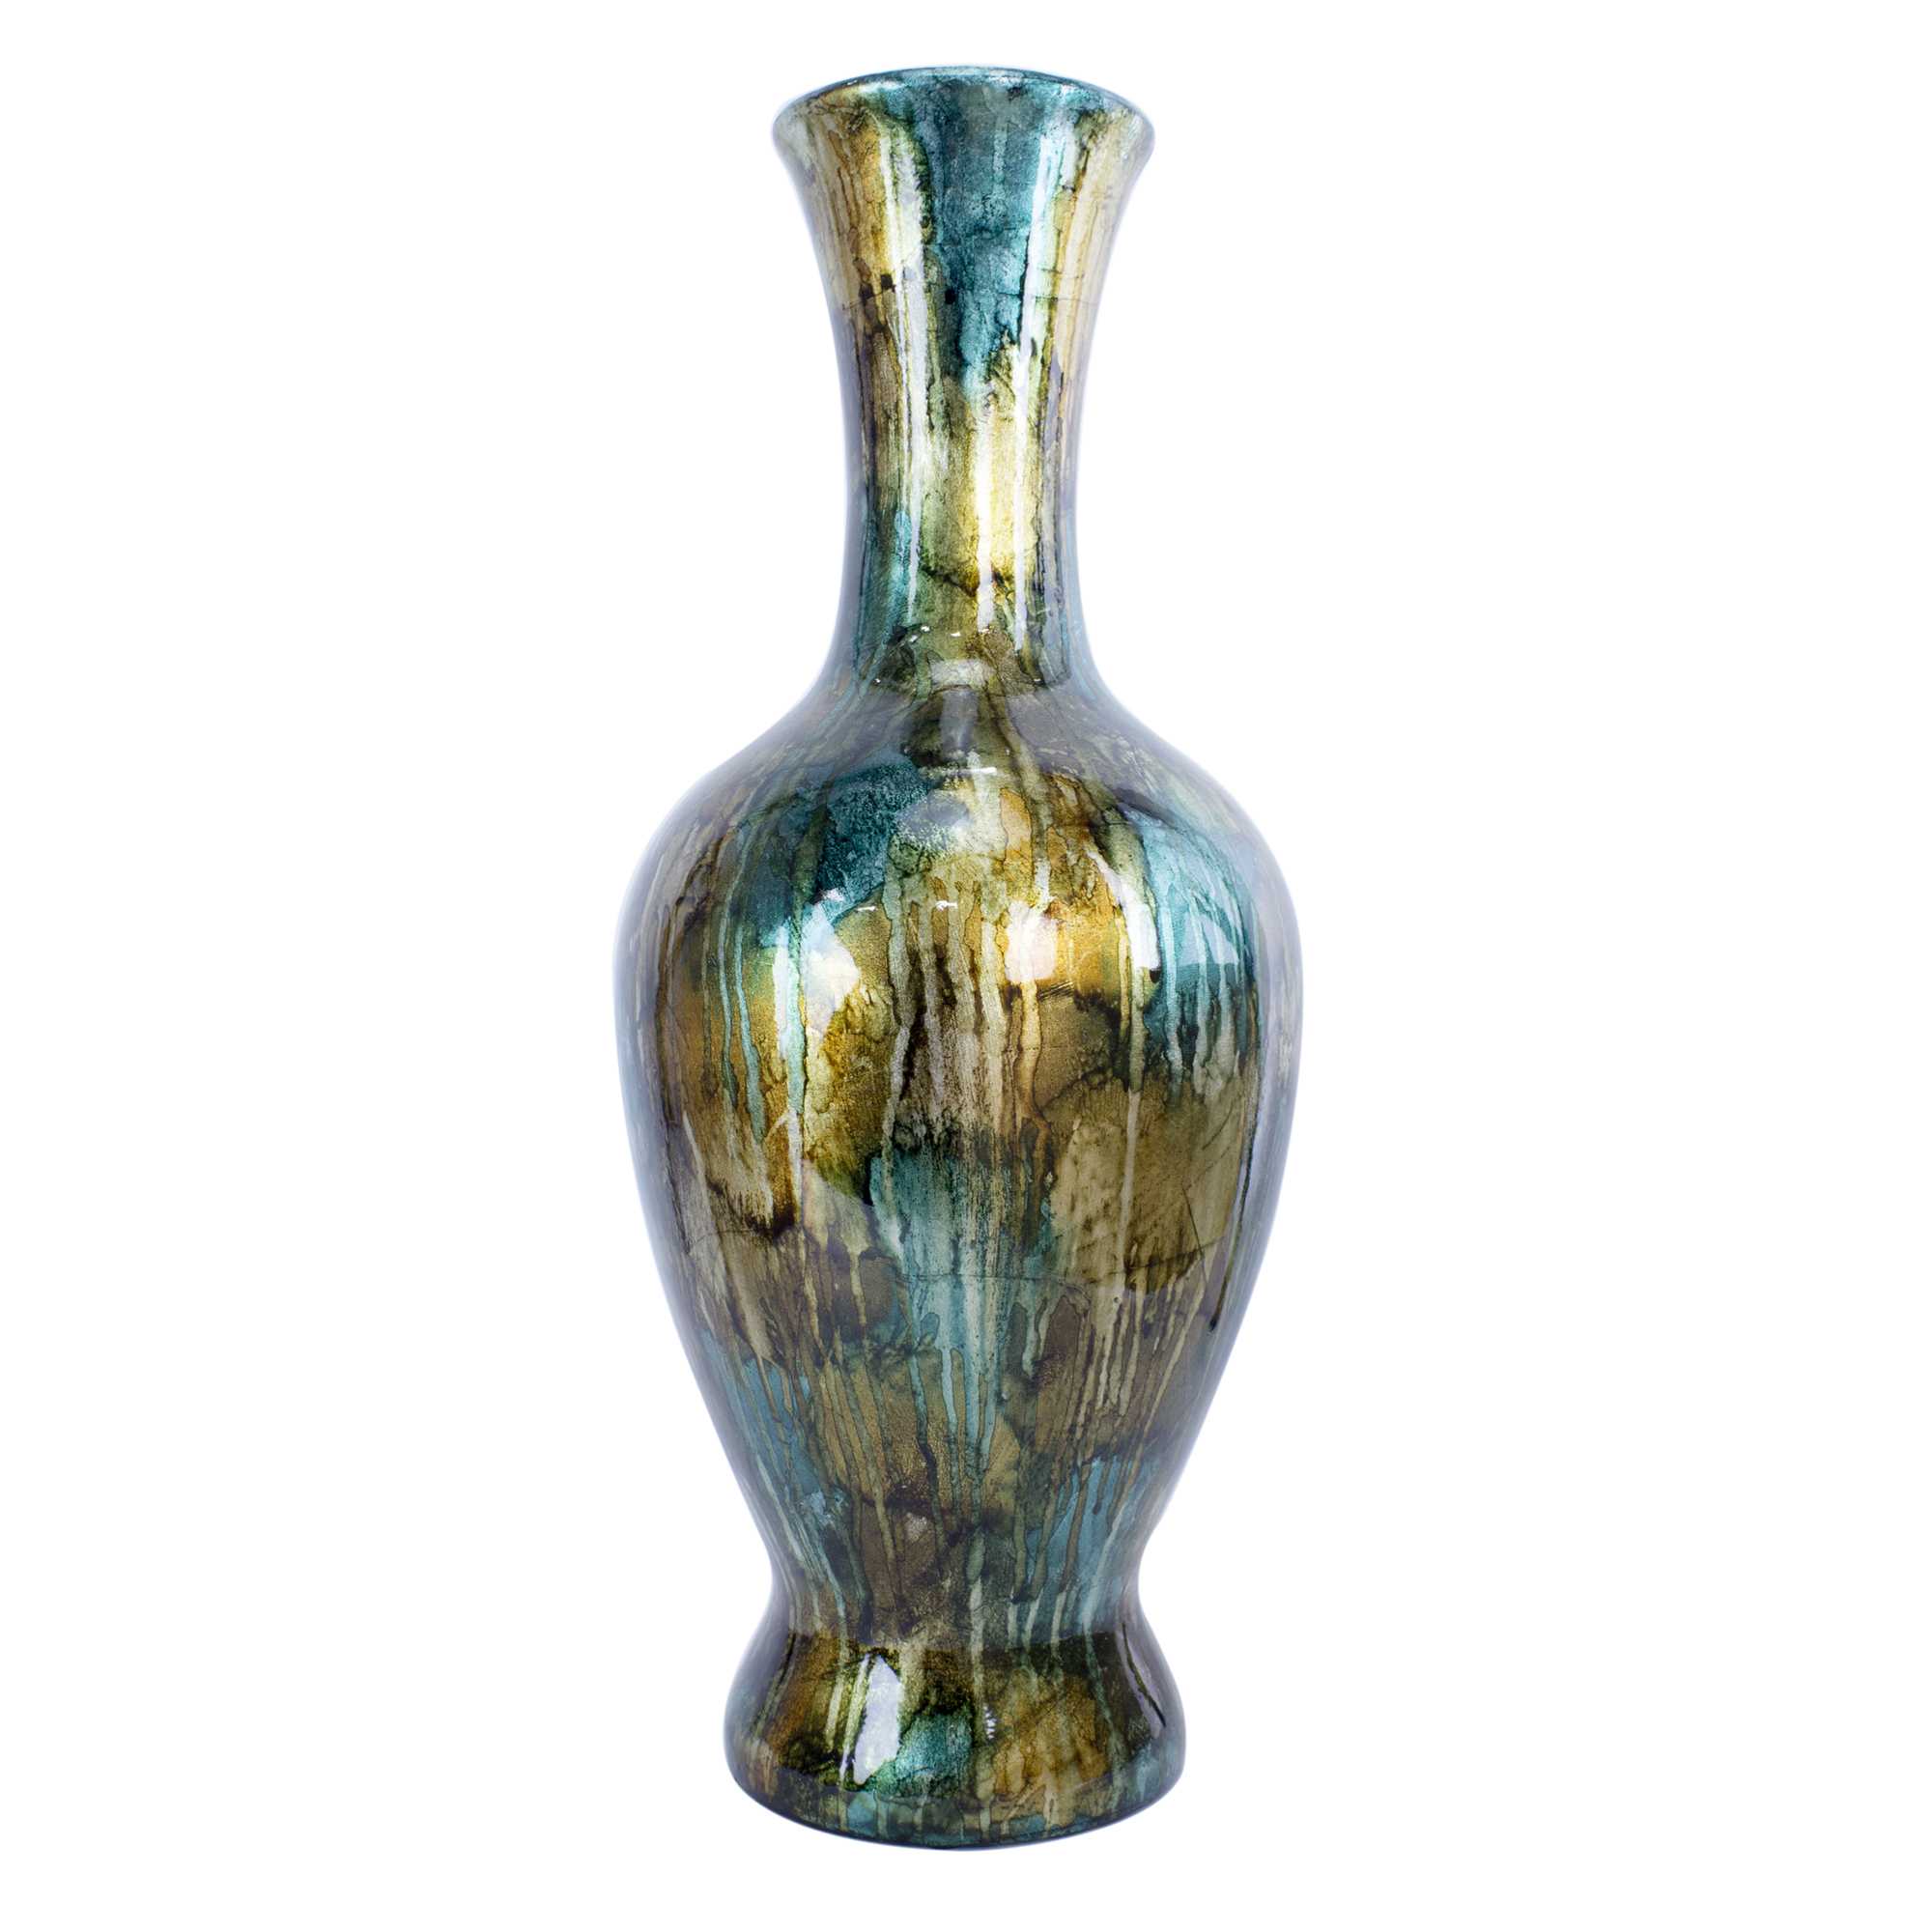 8.25" X 8.25" X 20" Turquoise Copper and Bronze Ceramic Foiled and Lacquered Vase